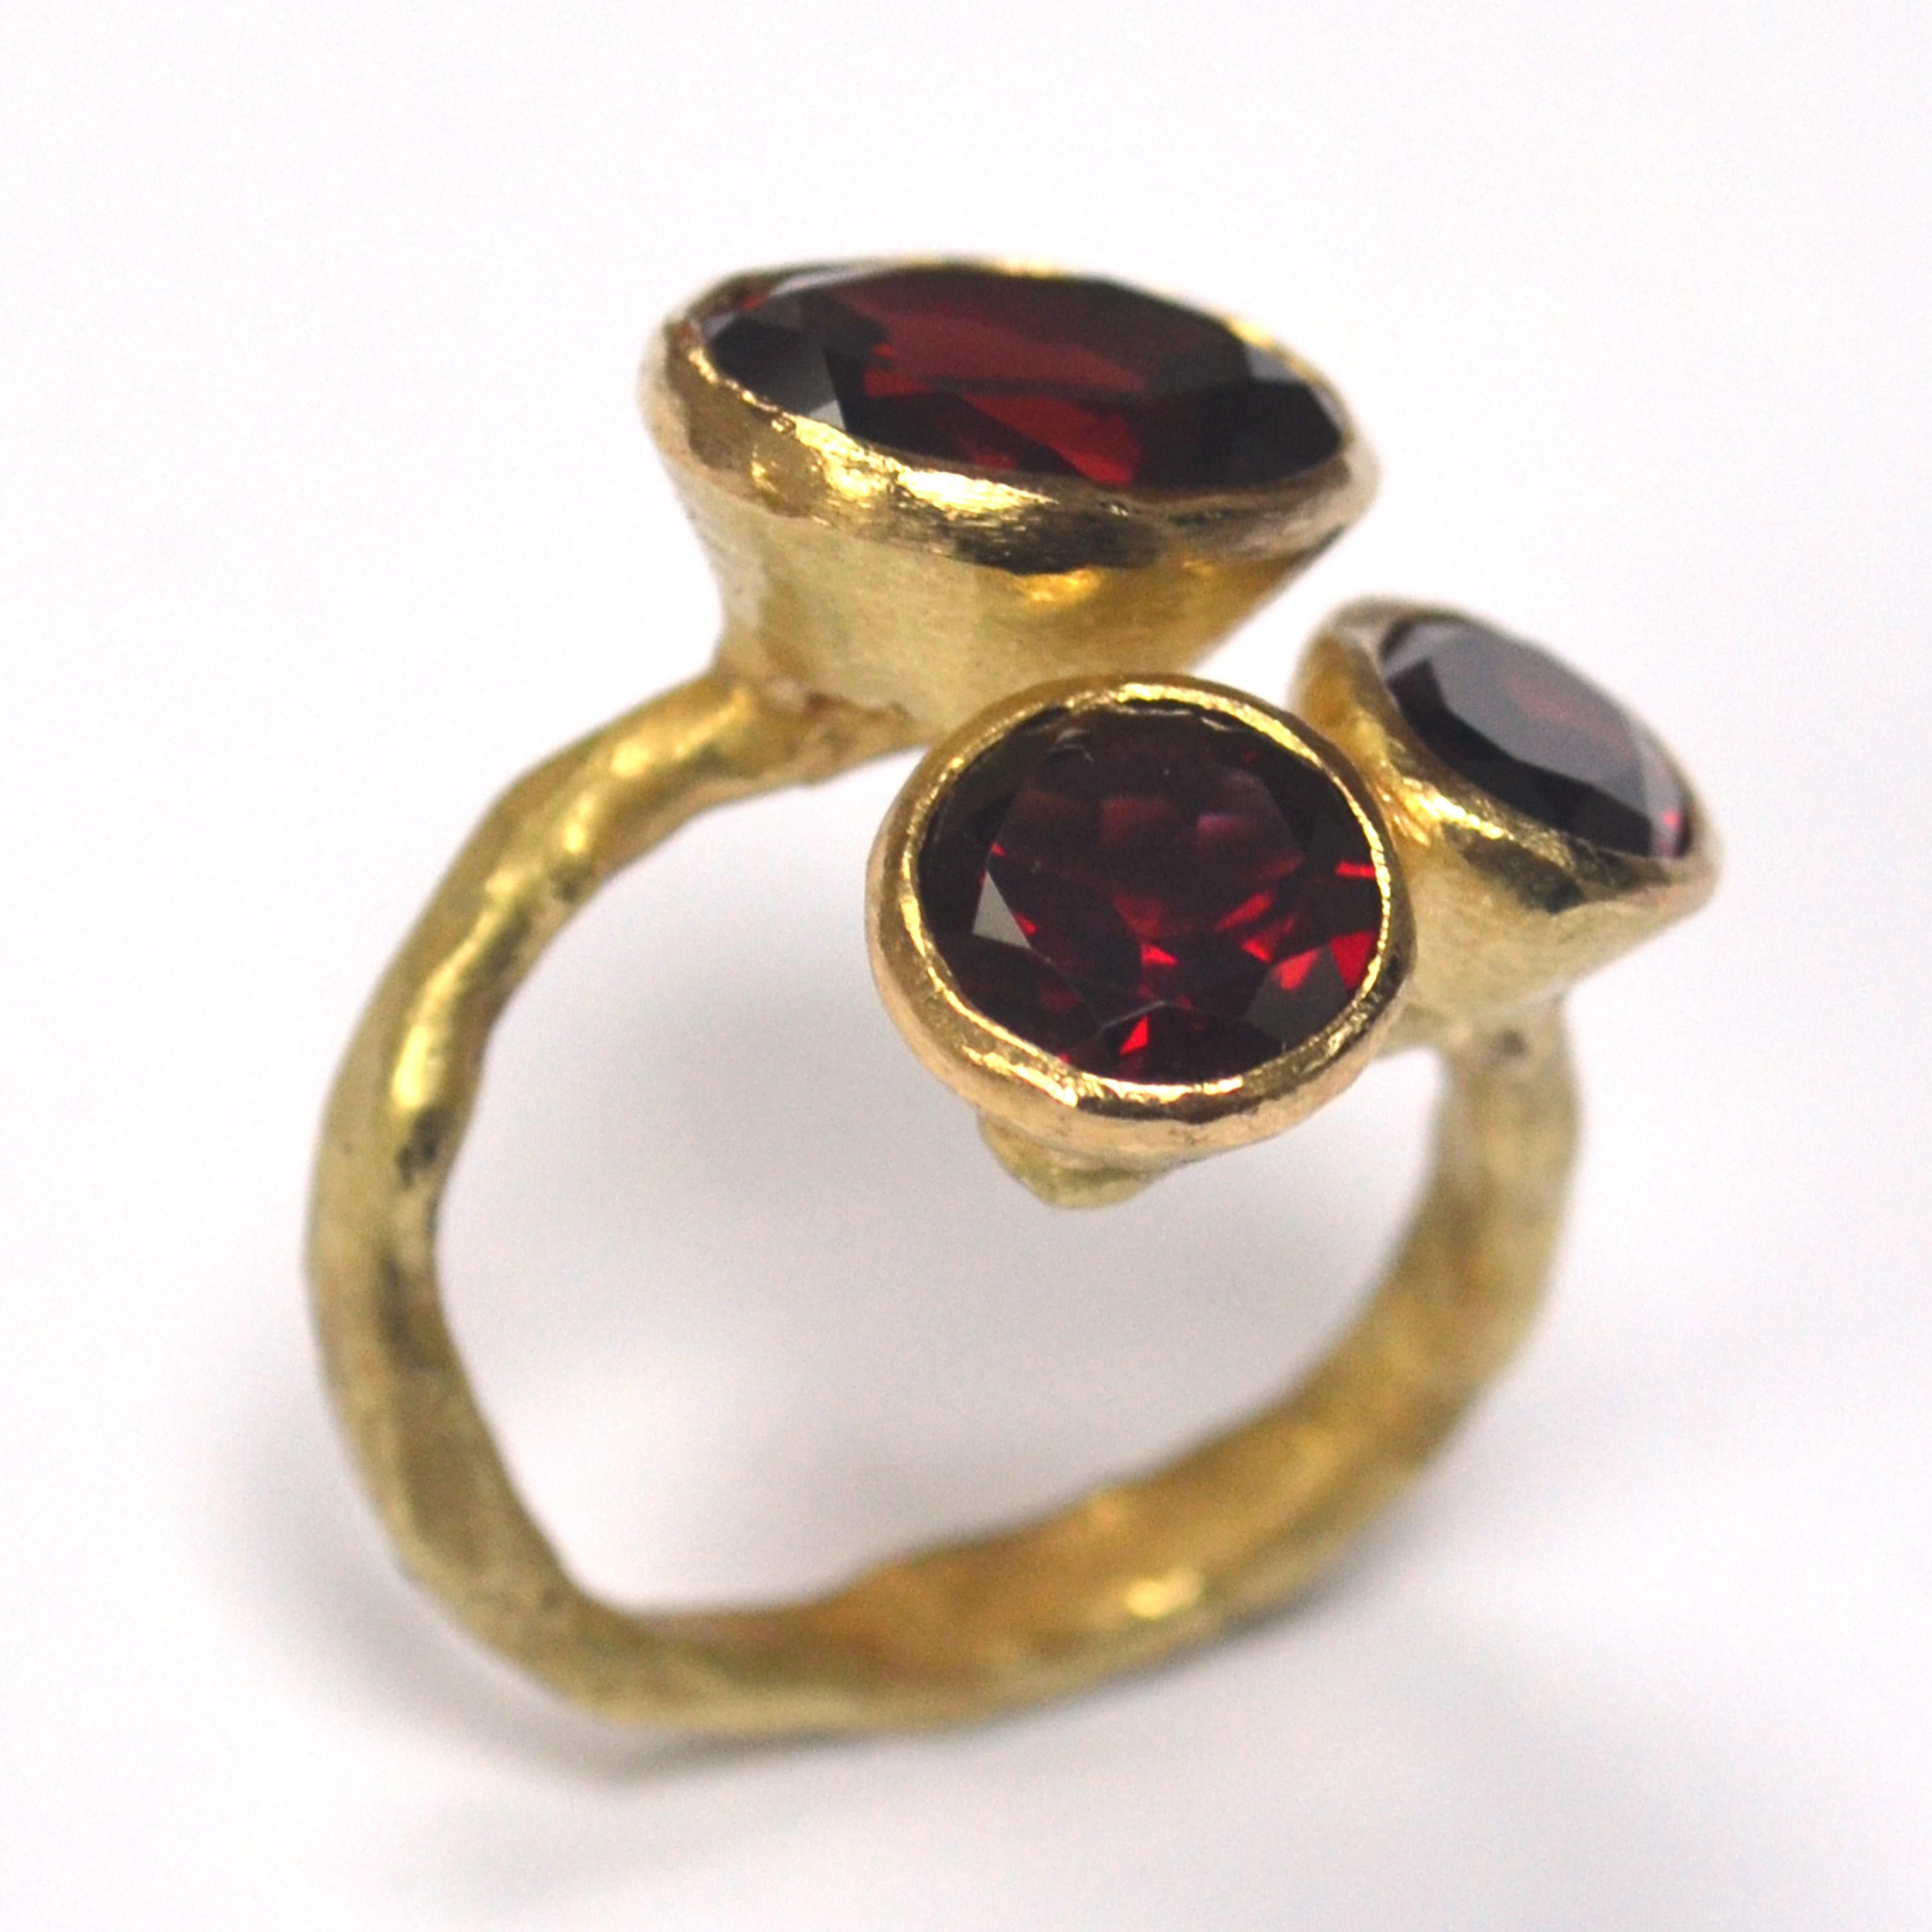 18k yellow gold handmade organic texture open ring with three garnet cluster.

The garnets in this ring are a beautiful true red, cut so that flashes of red glint away in any light. The band has been made using Disa Allsopps signature reticulation